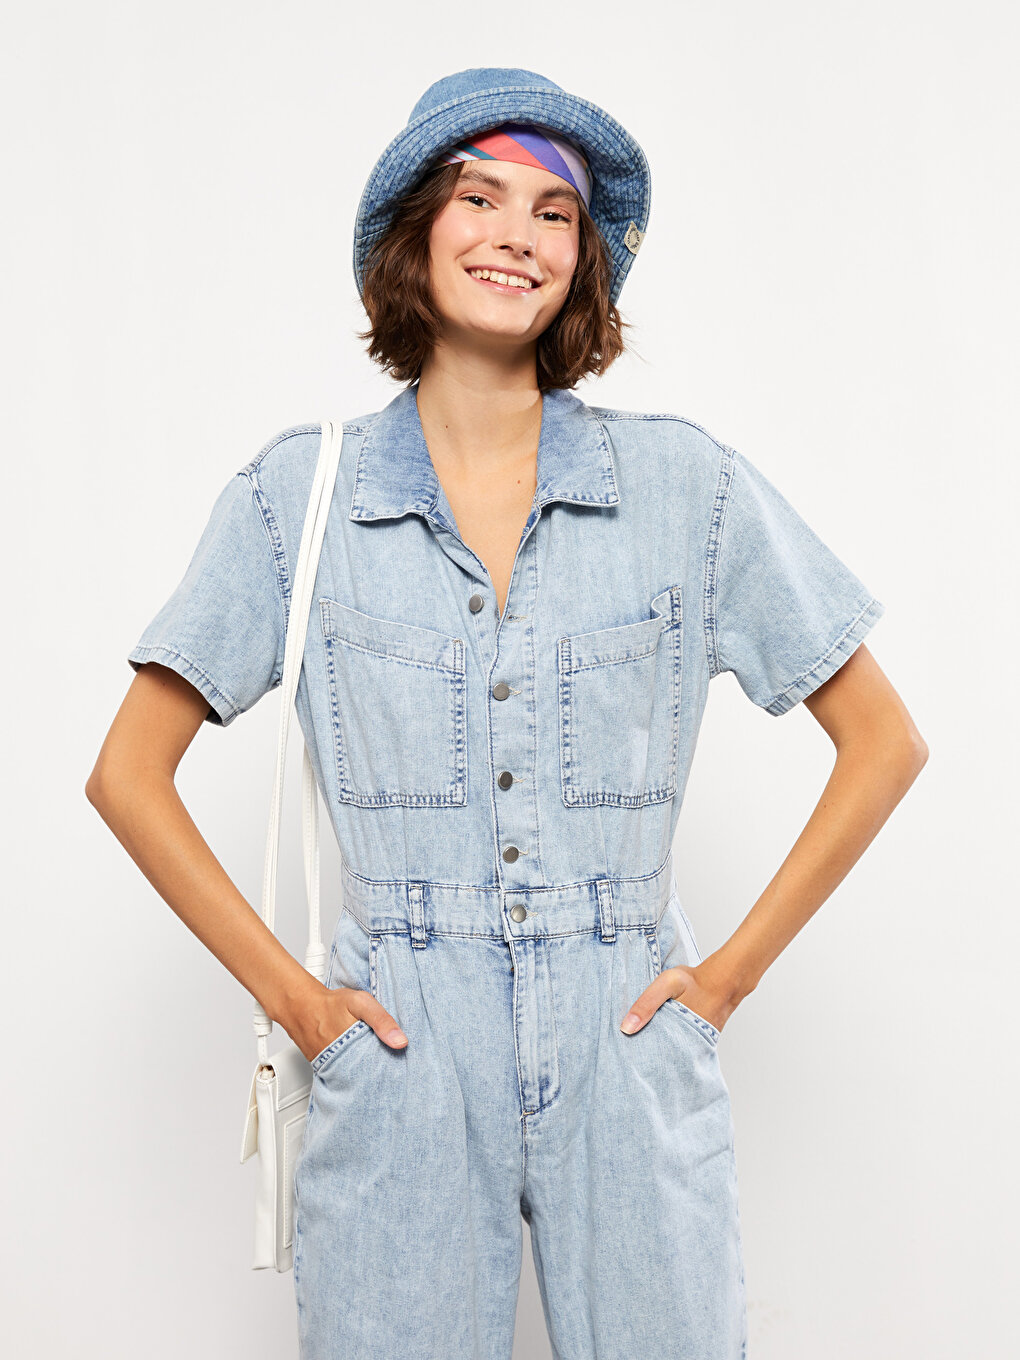 Jumpsuit Jeans with Short Sleeve, Pocket and Button Up